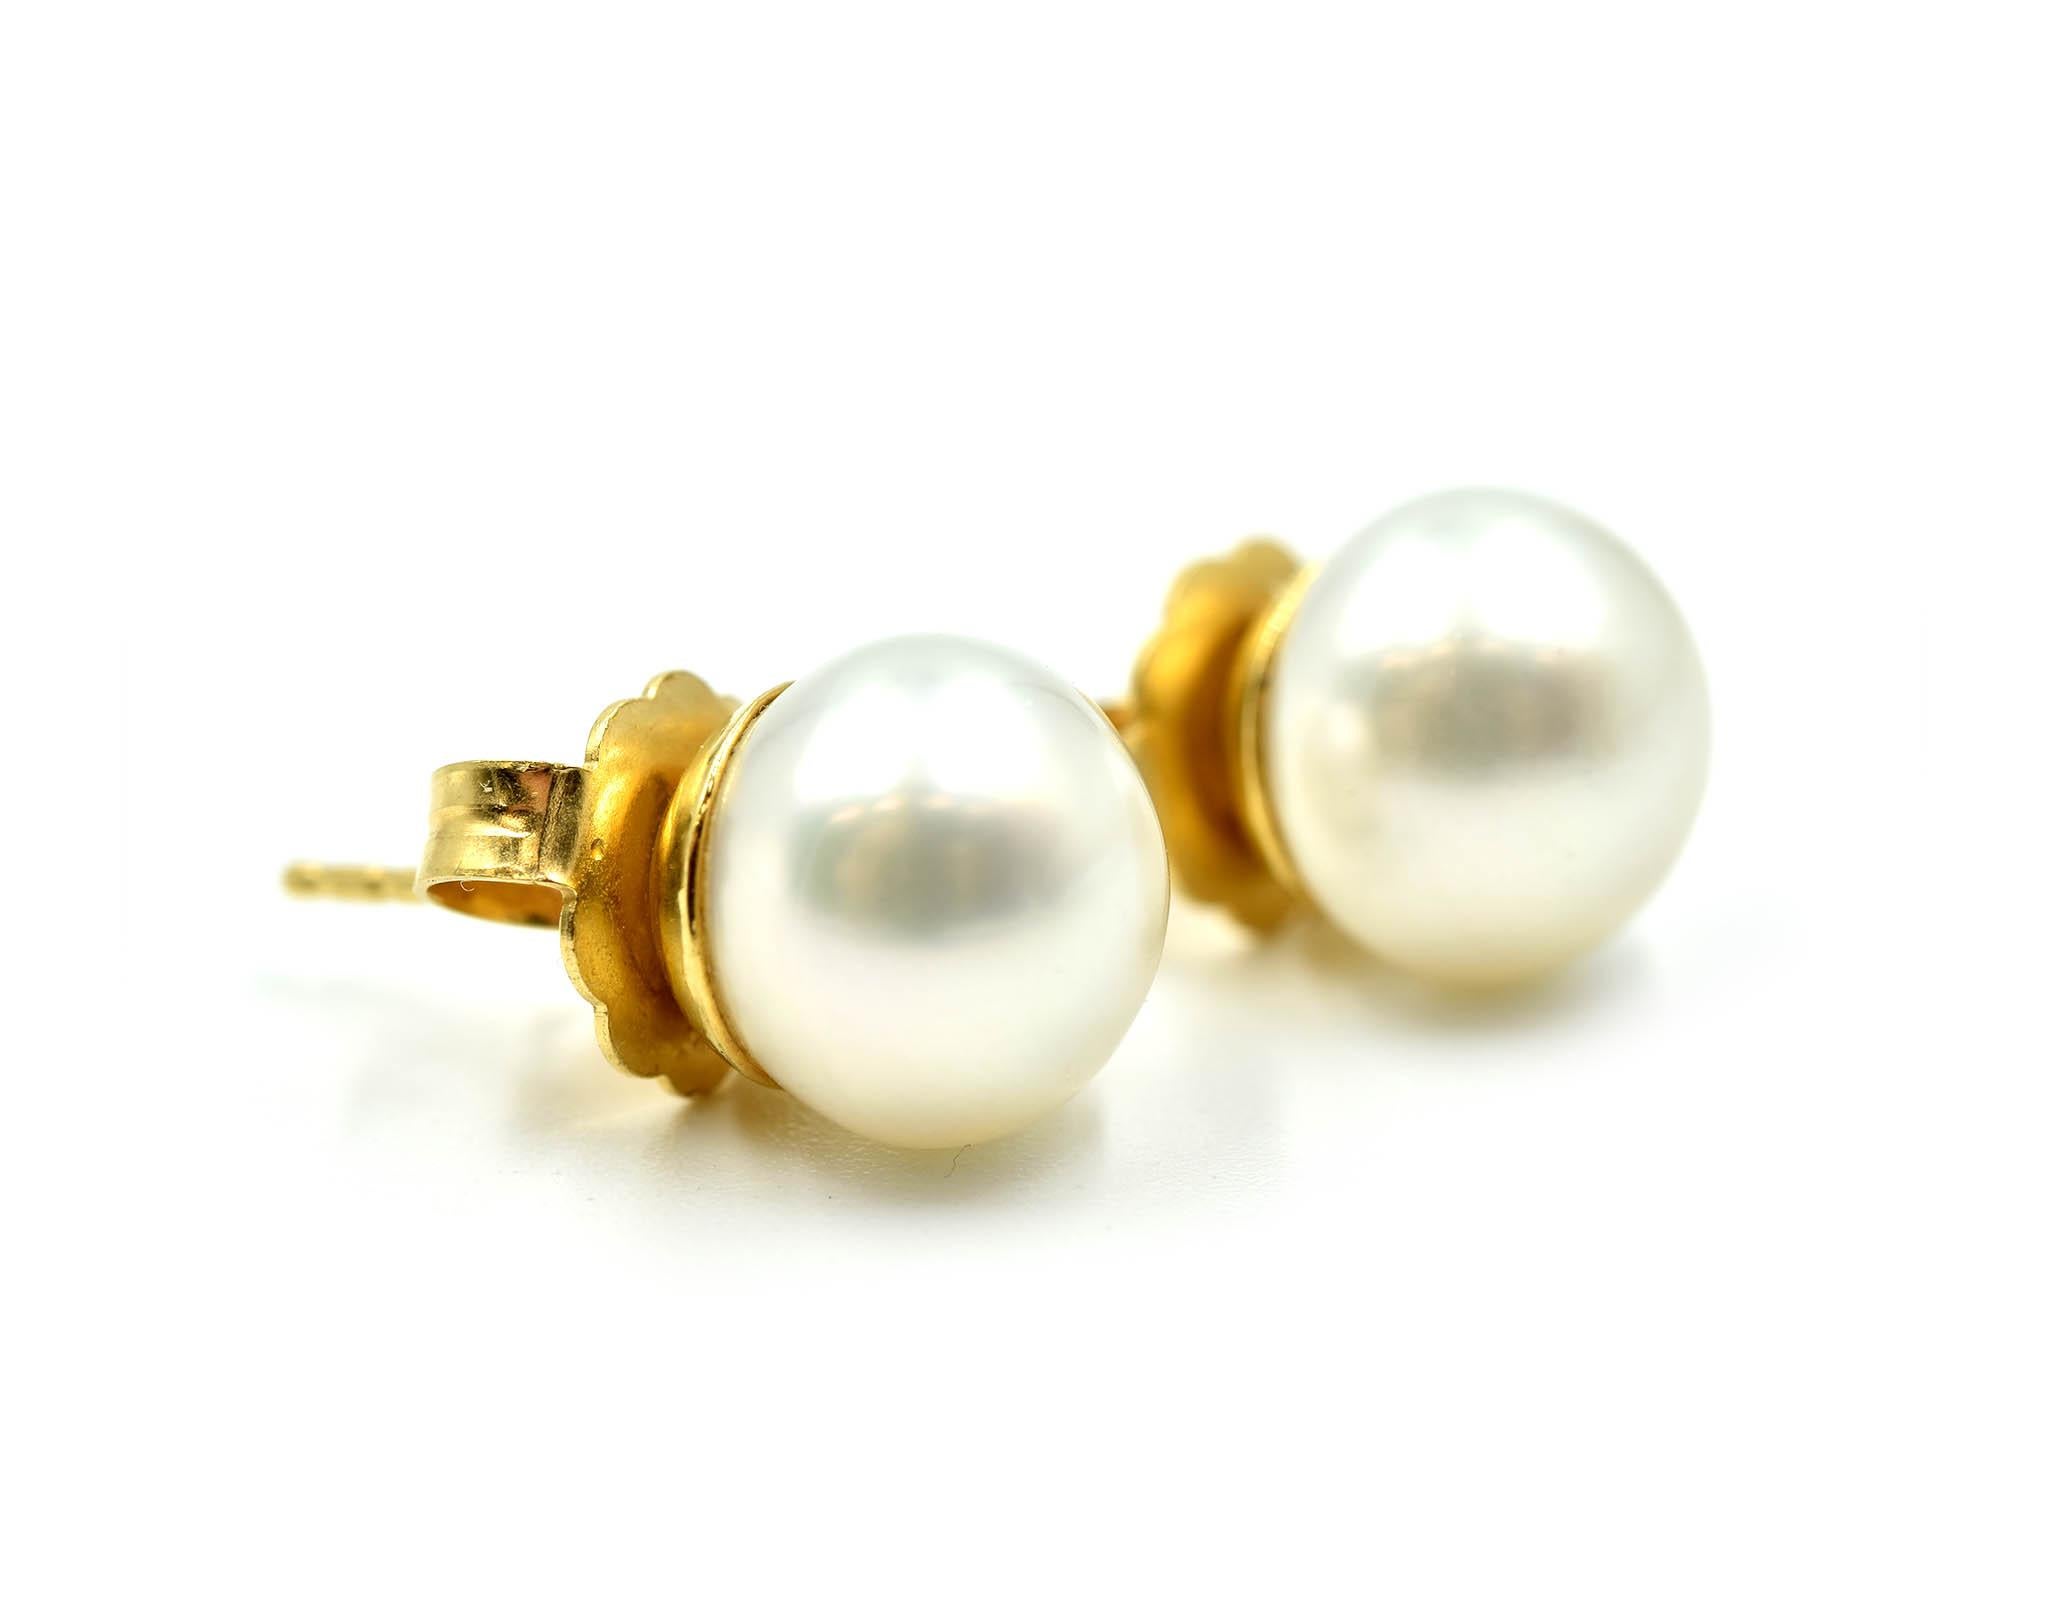 This classic pair is designed in 18k yellow gold. Each stud features a 10.3mm natural pearl. The pearls are white with silver overtones. Each earring is secured with a friction back fastening. The pair weighs 5.7 grams. 